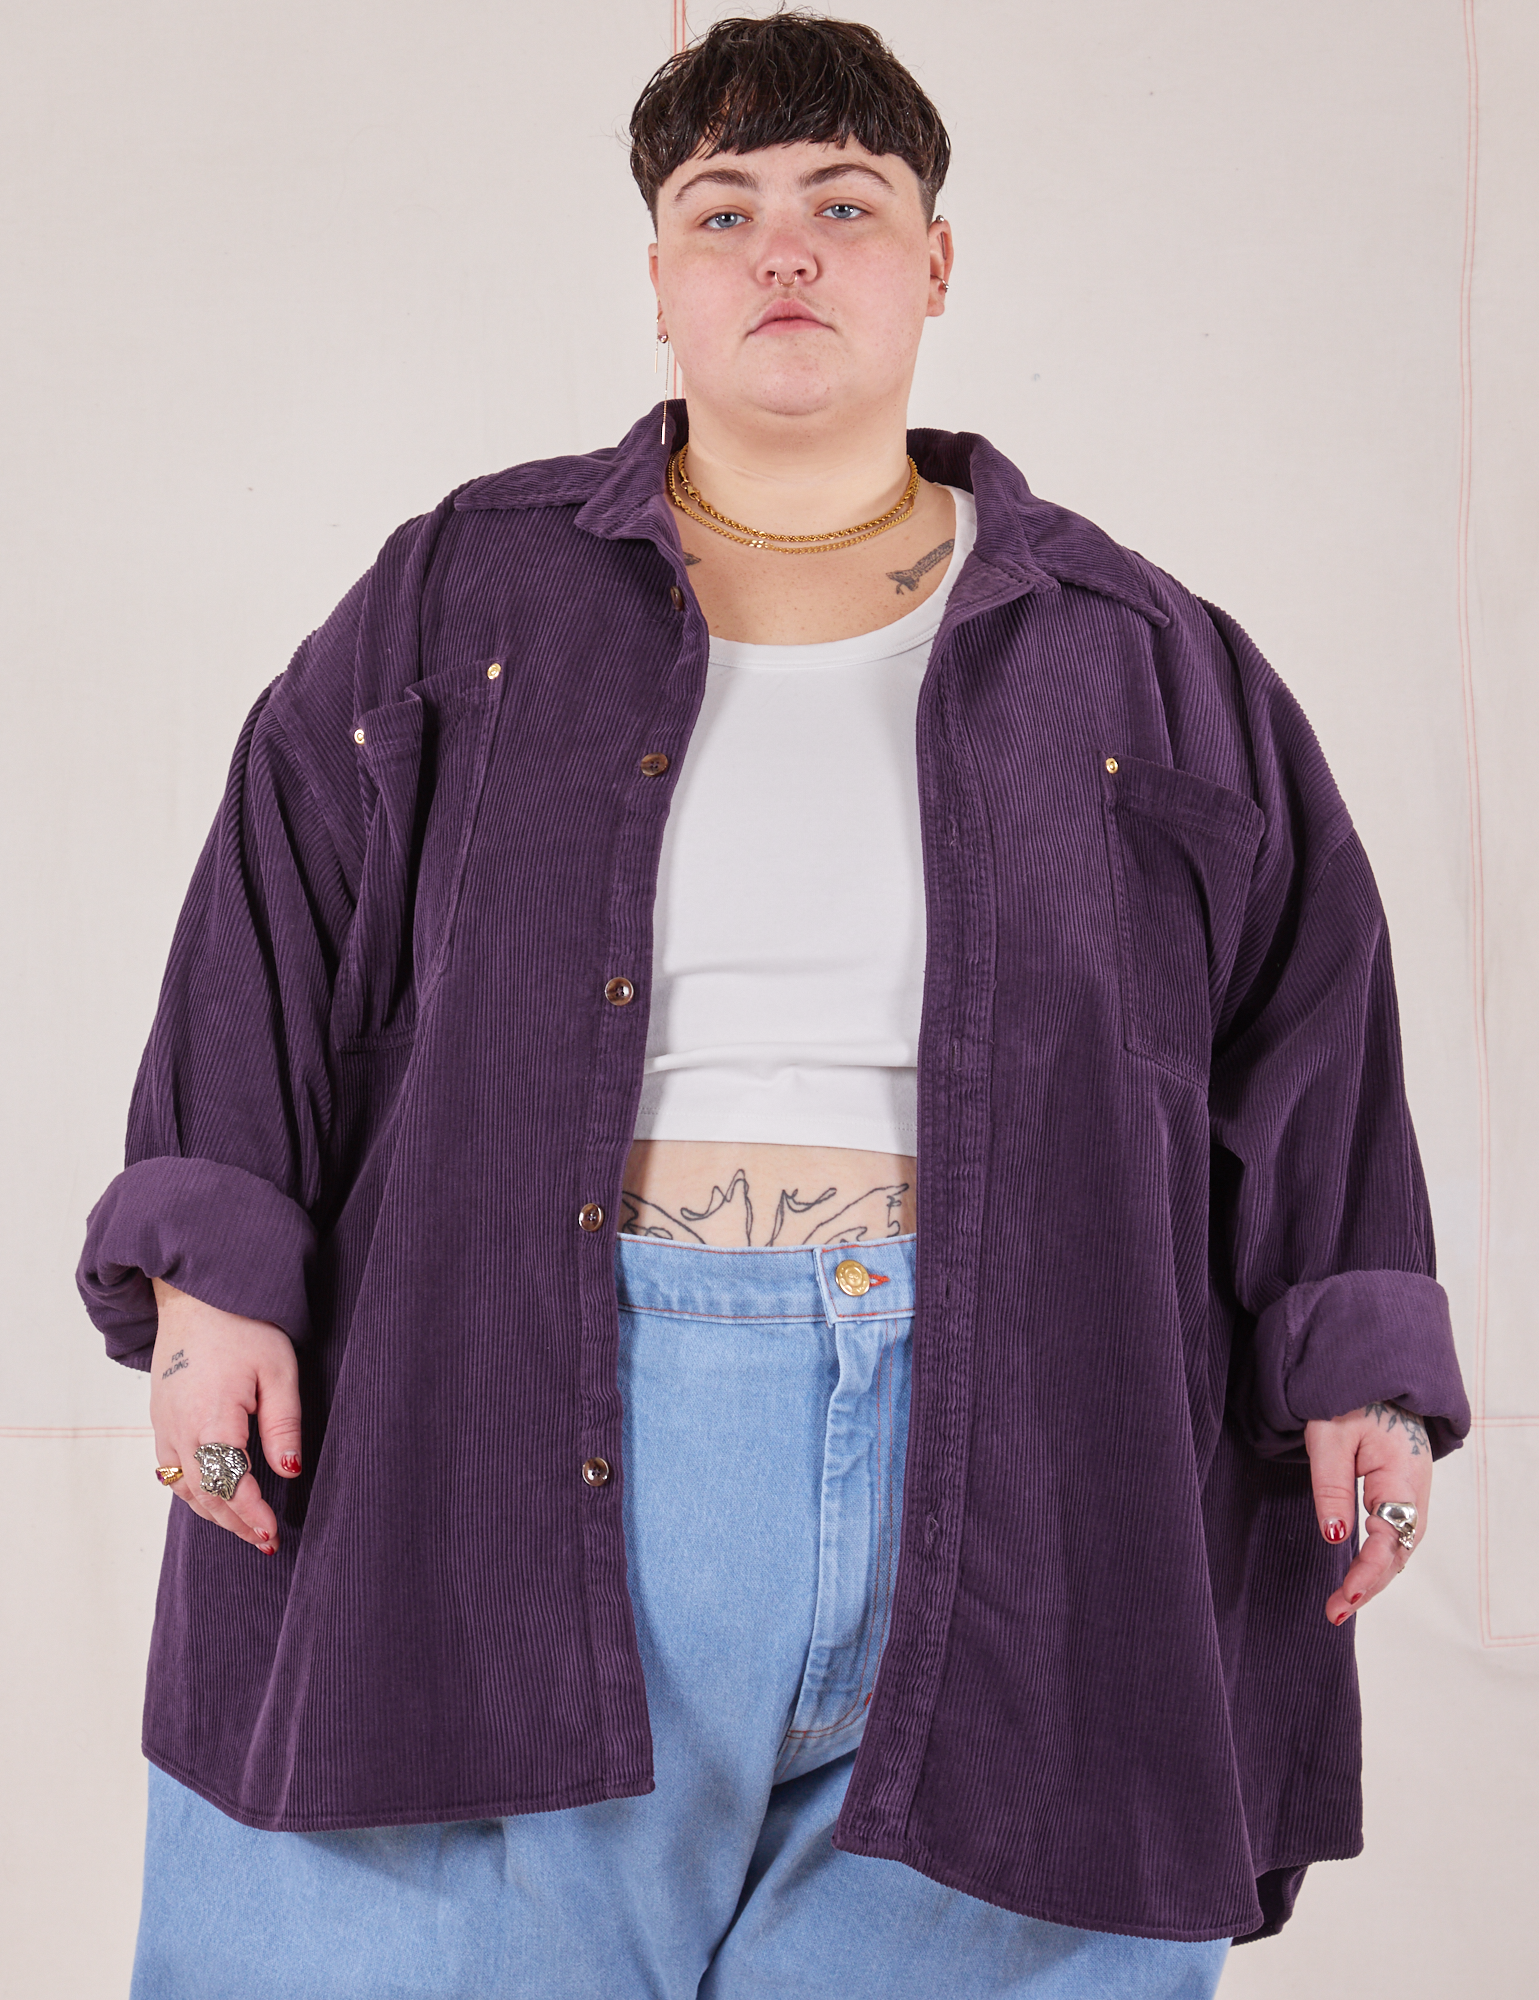 Jordan is 5&#39;4&quot; and wearing 4XL Corduroy Overshirt in Nebula Purple with a vintage off-white Cropped Tank Top underneath paired with a light wash Denim Trouser Jeans